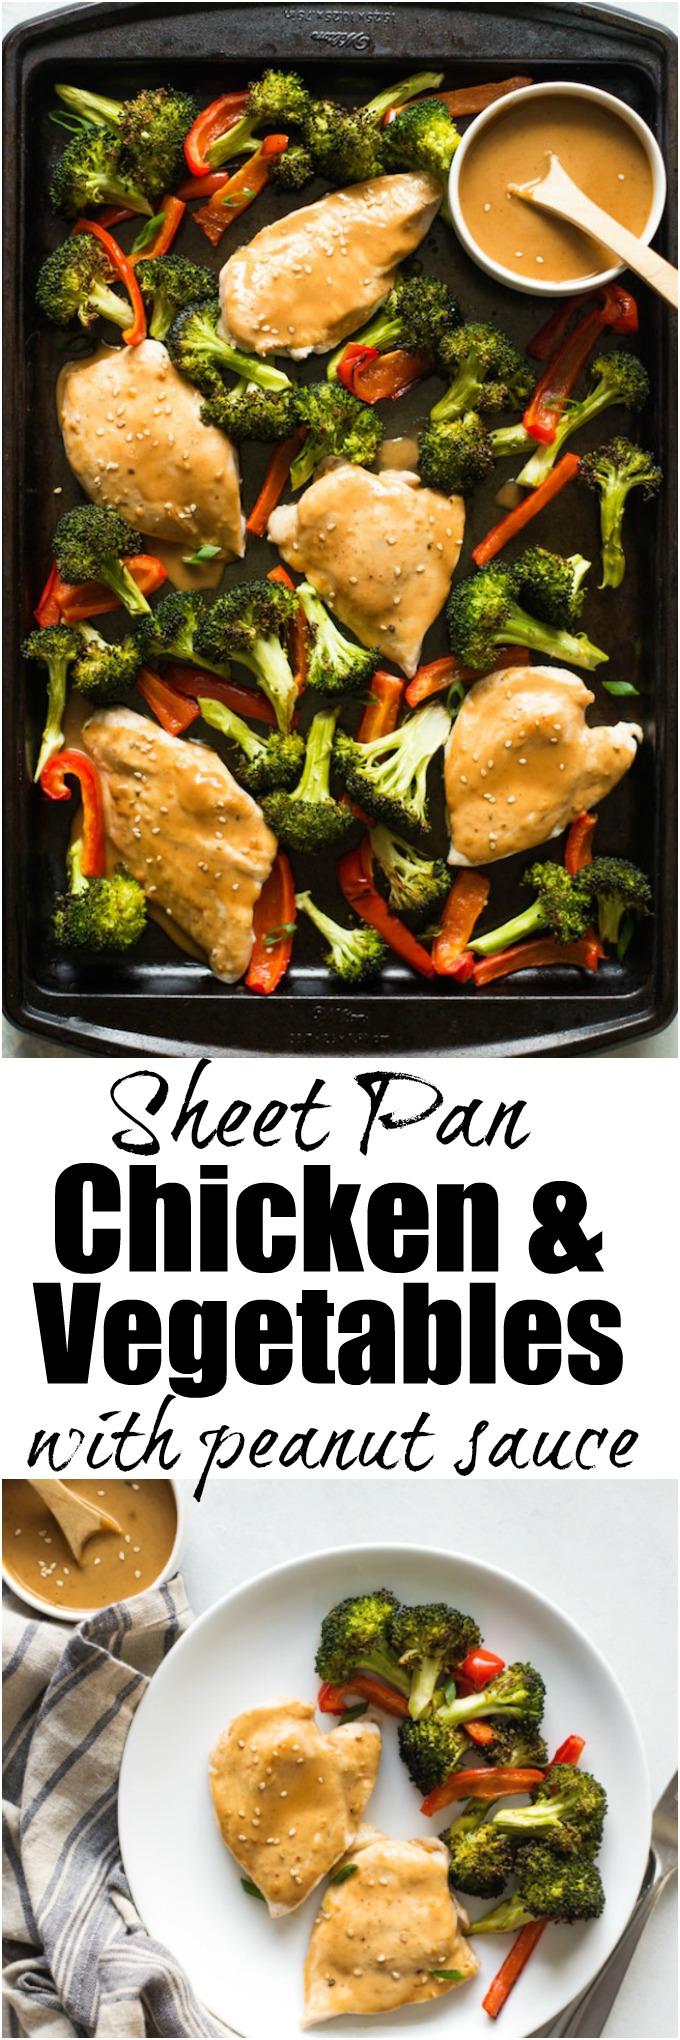 This easy Sheet Pan Chicken and Vegetables recipe is a quick and healthy. Top it with a flavorful peanut sauce and the whole family will love it!